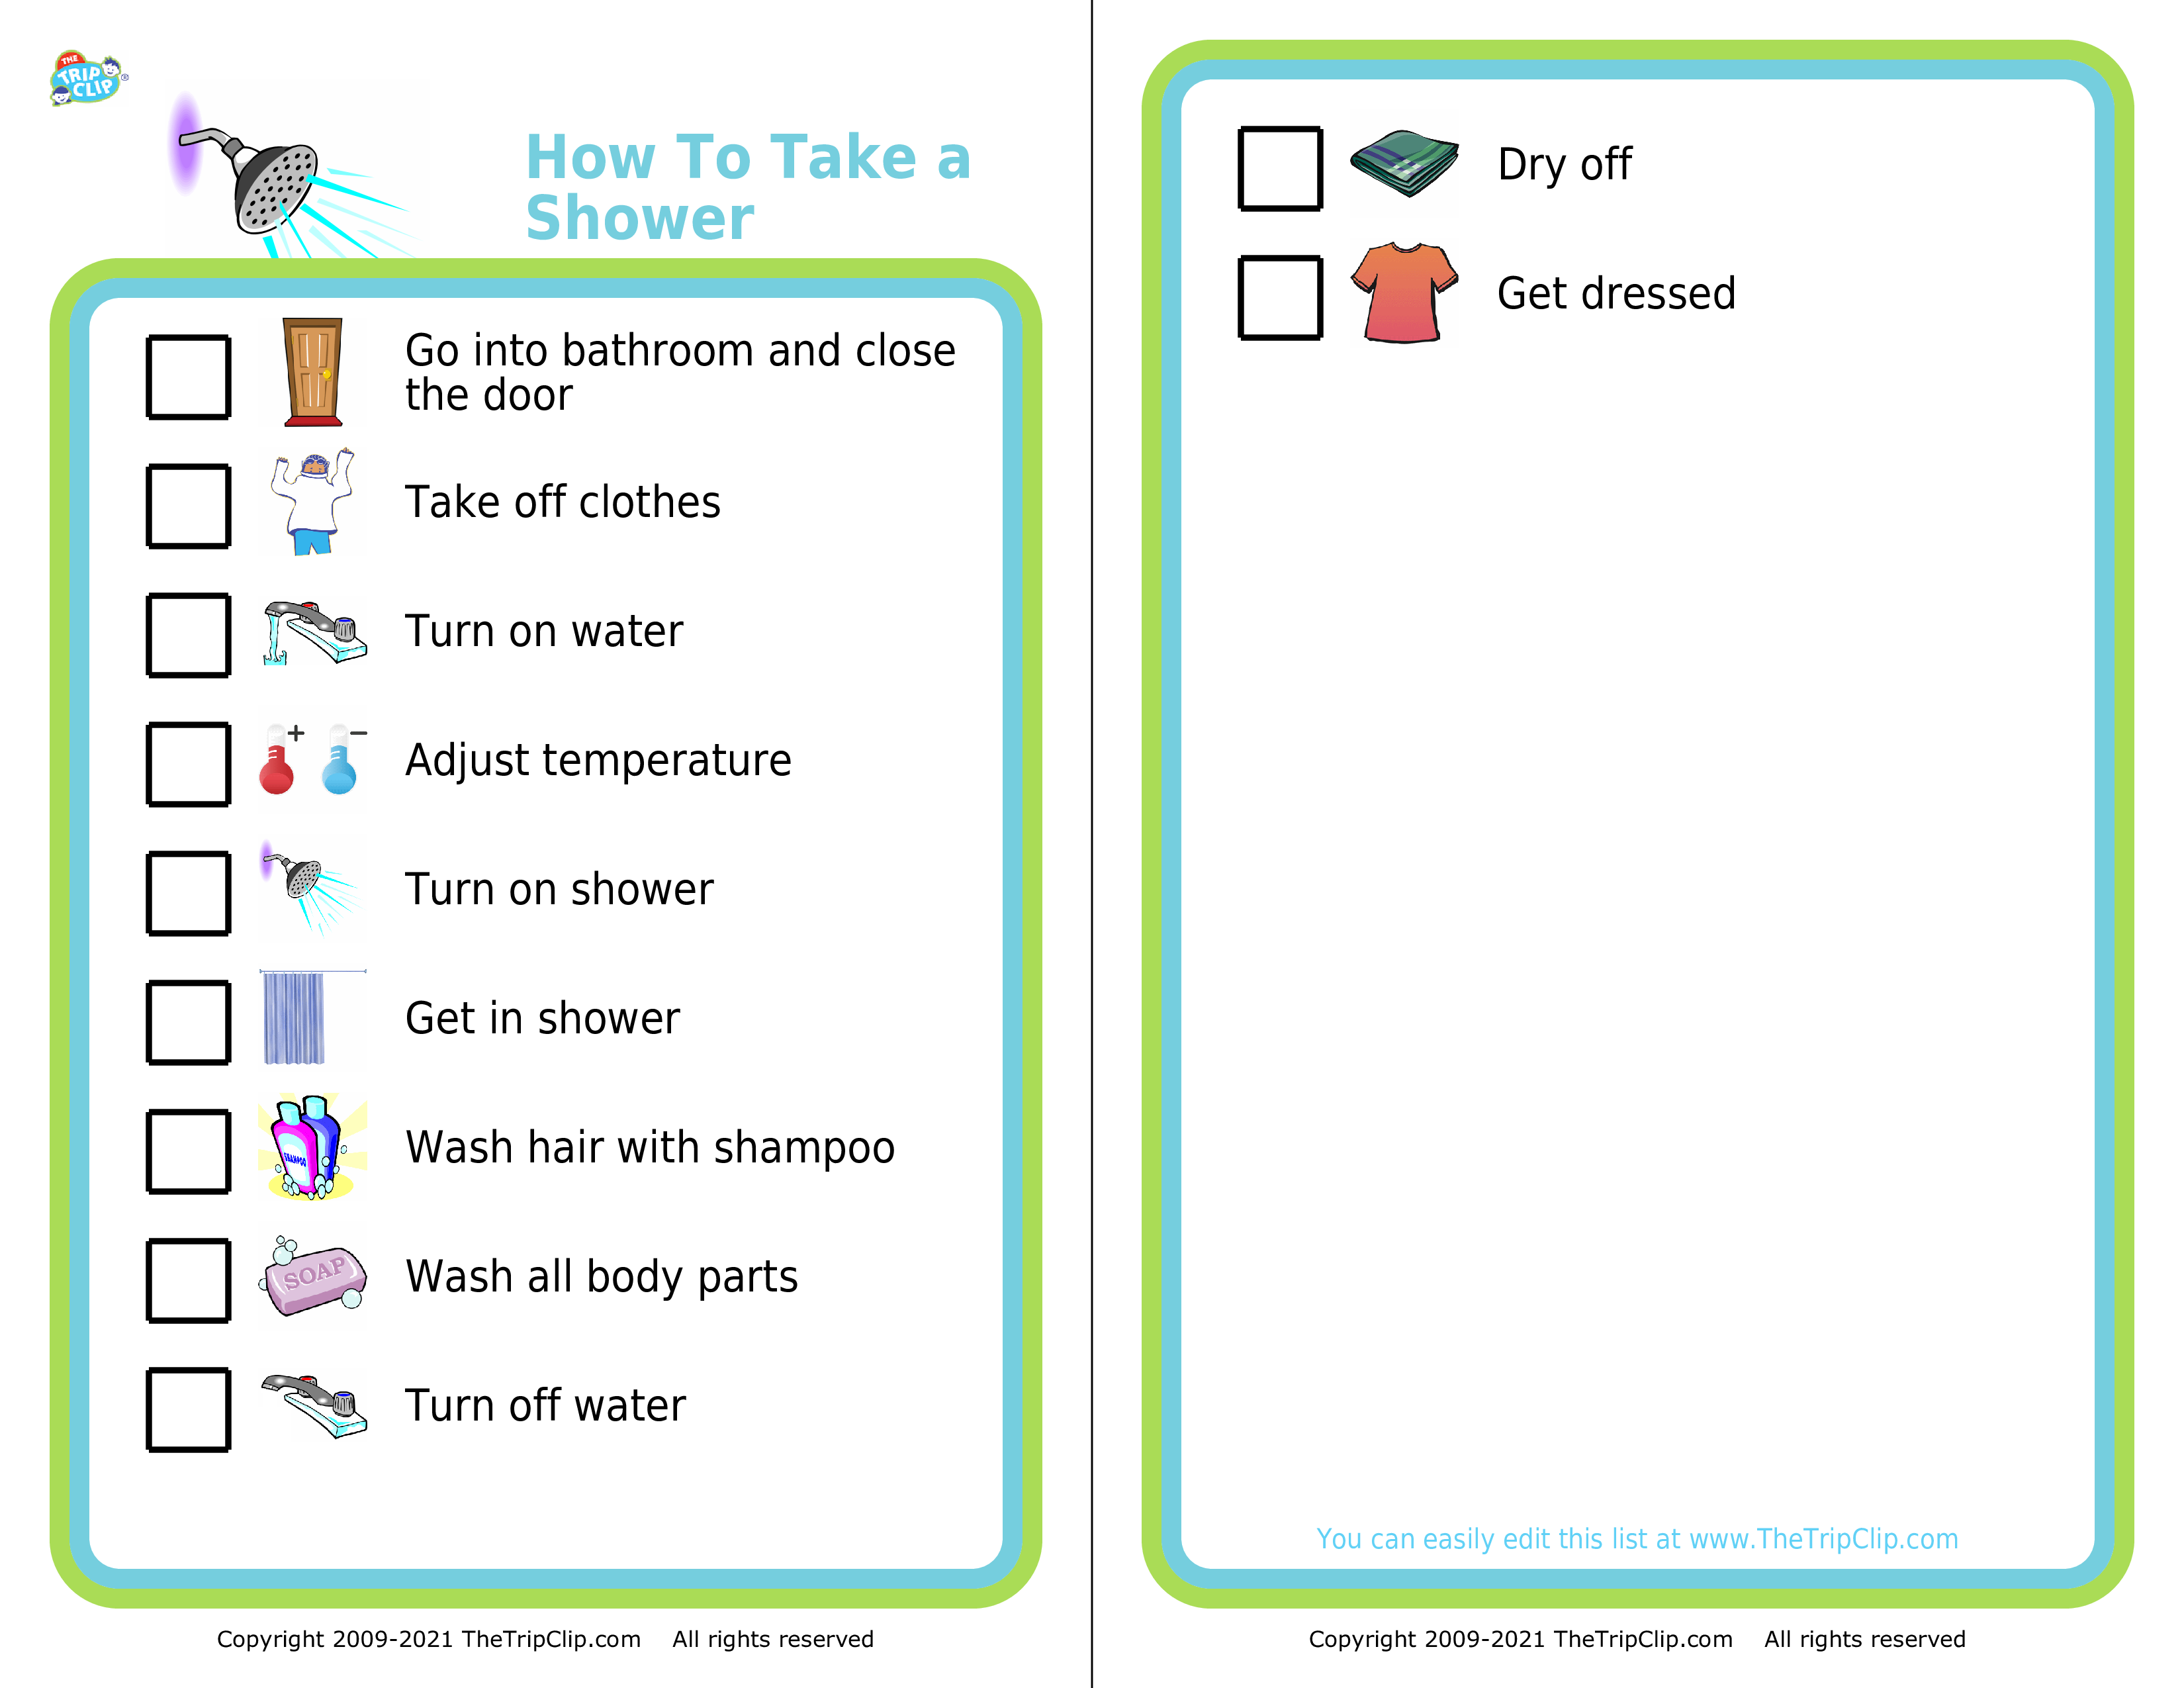 Picture checklist showing the steps for how to take a shower